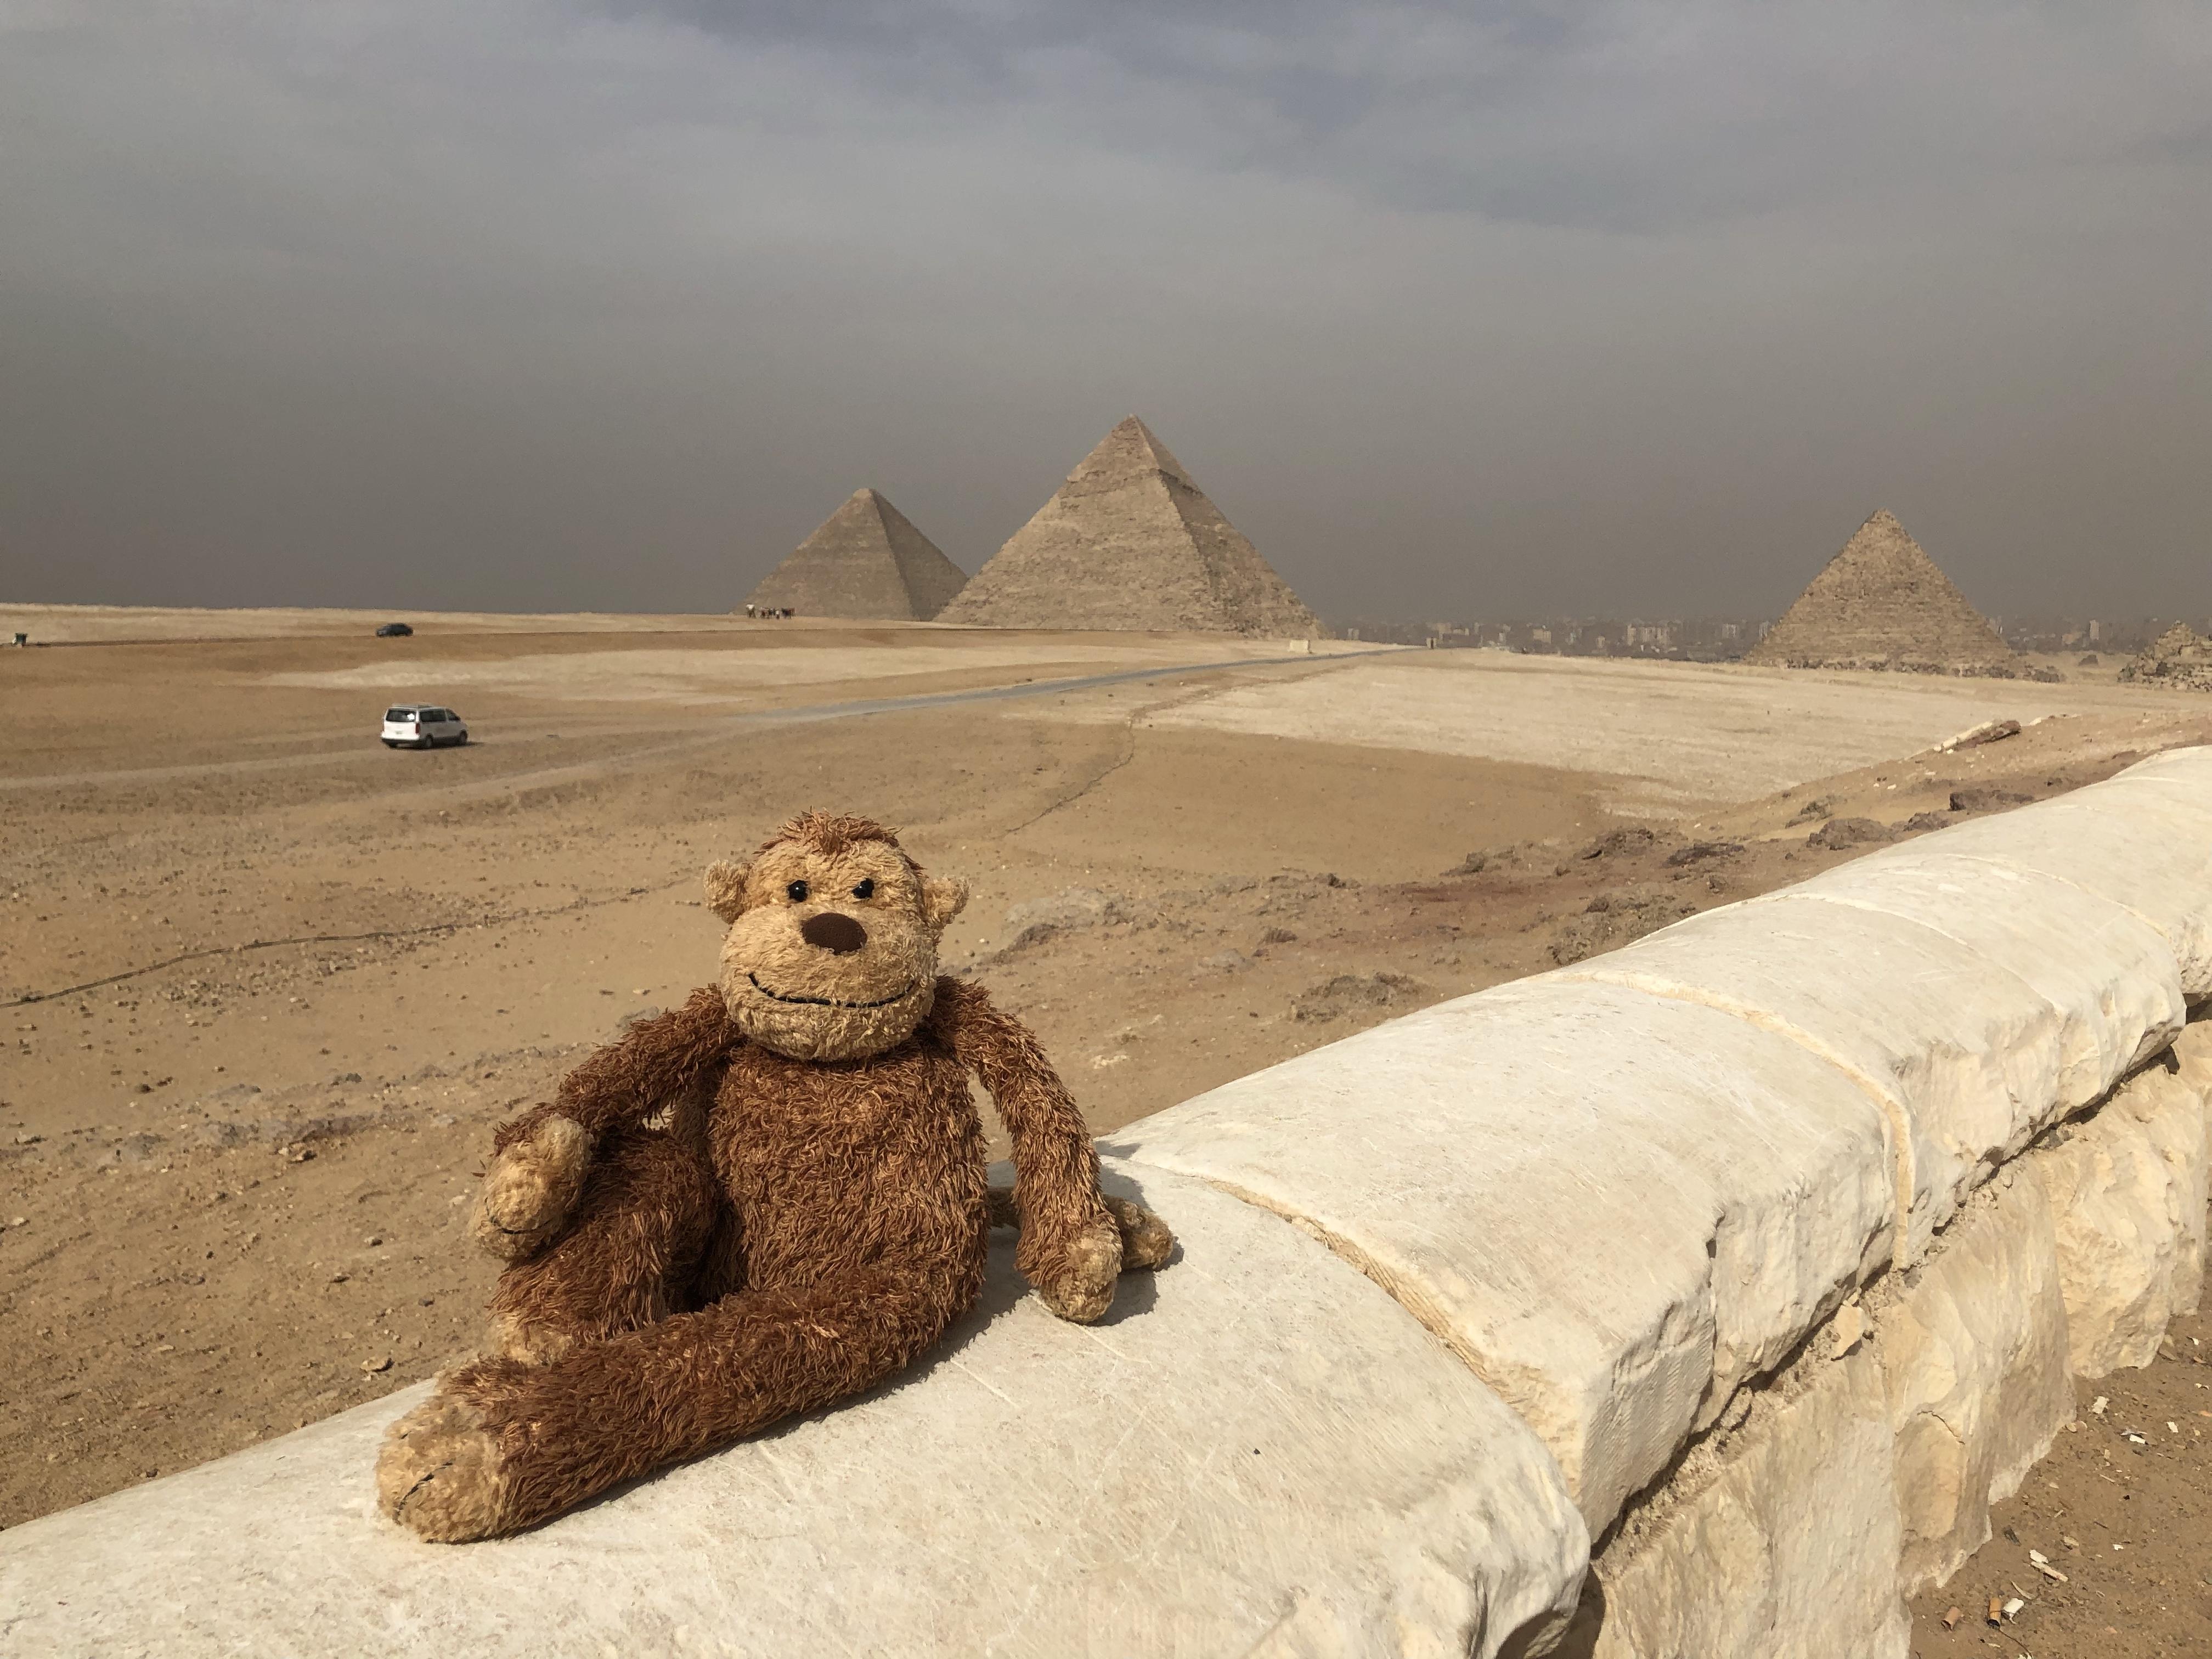 a stuffed animal sitting on a ledge in front of a pyramid